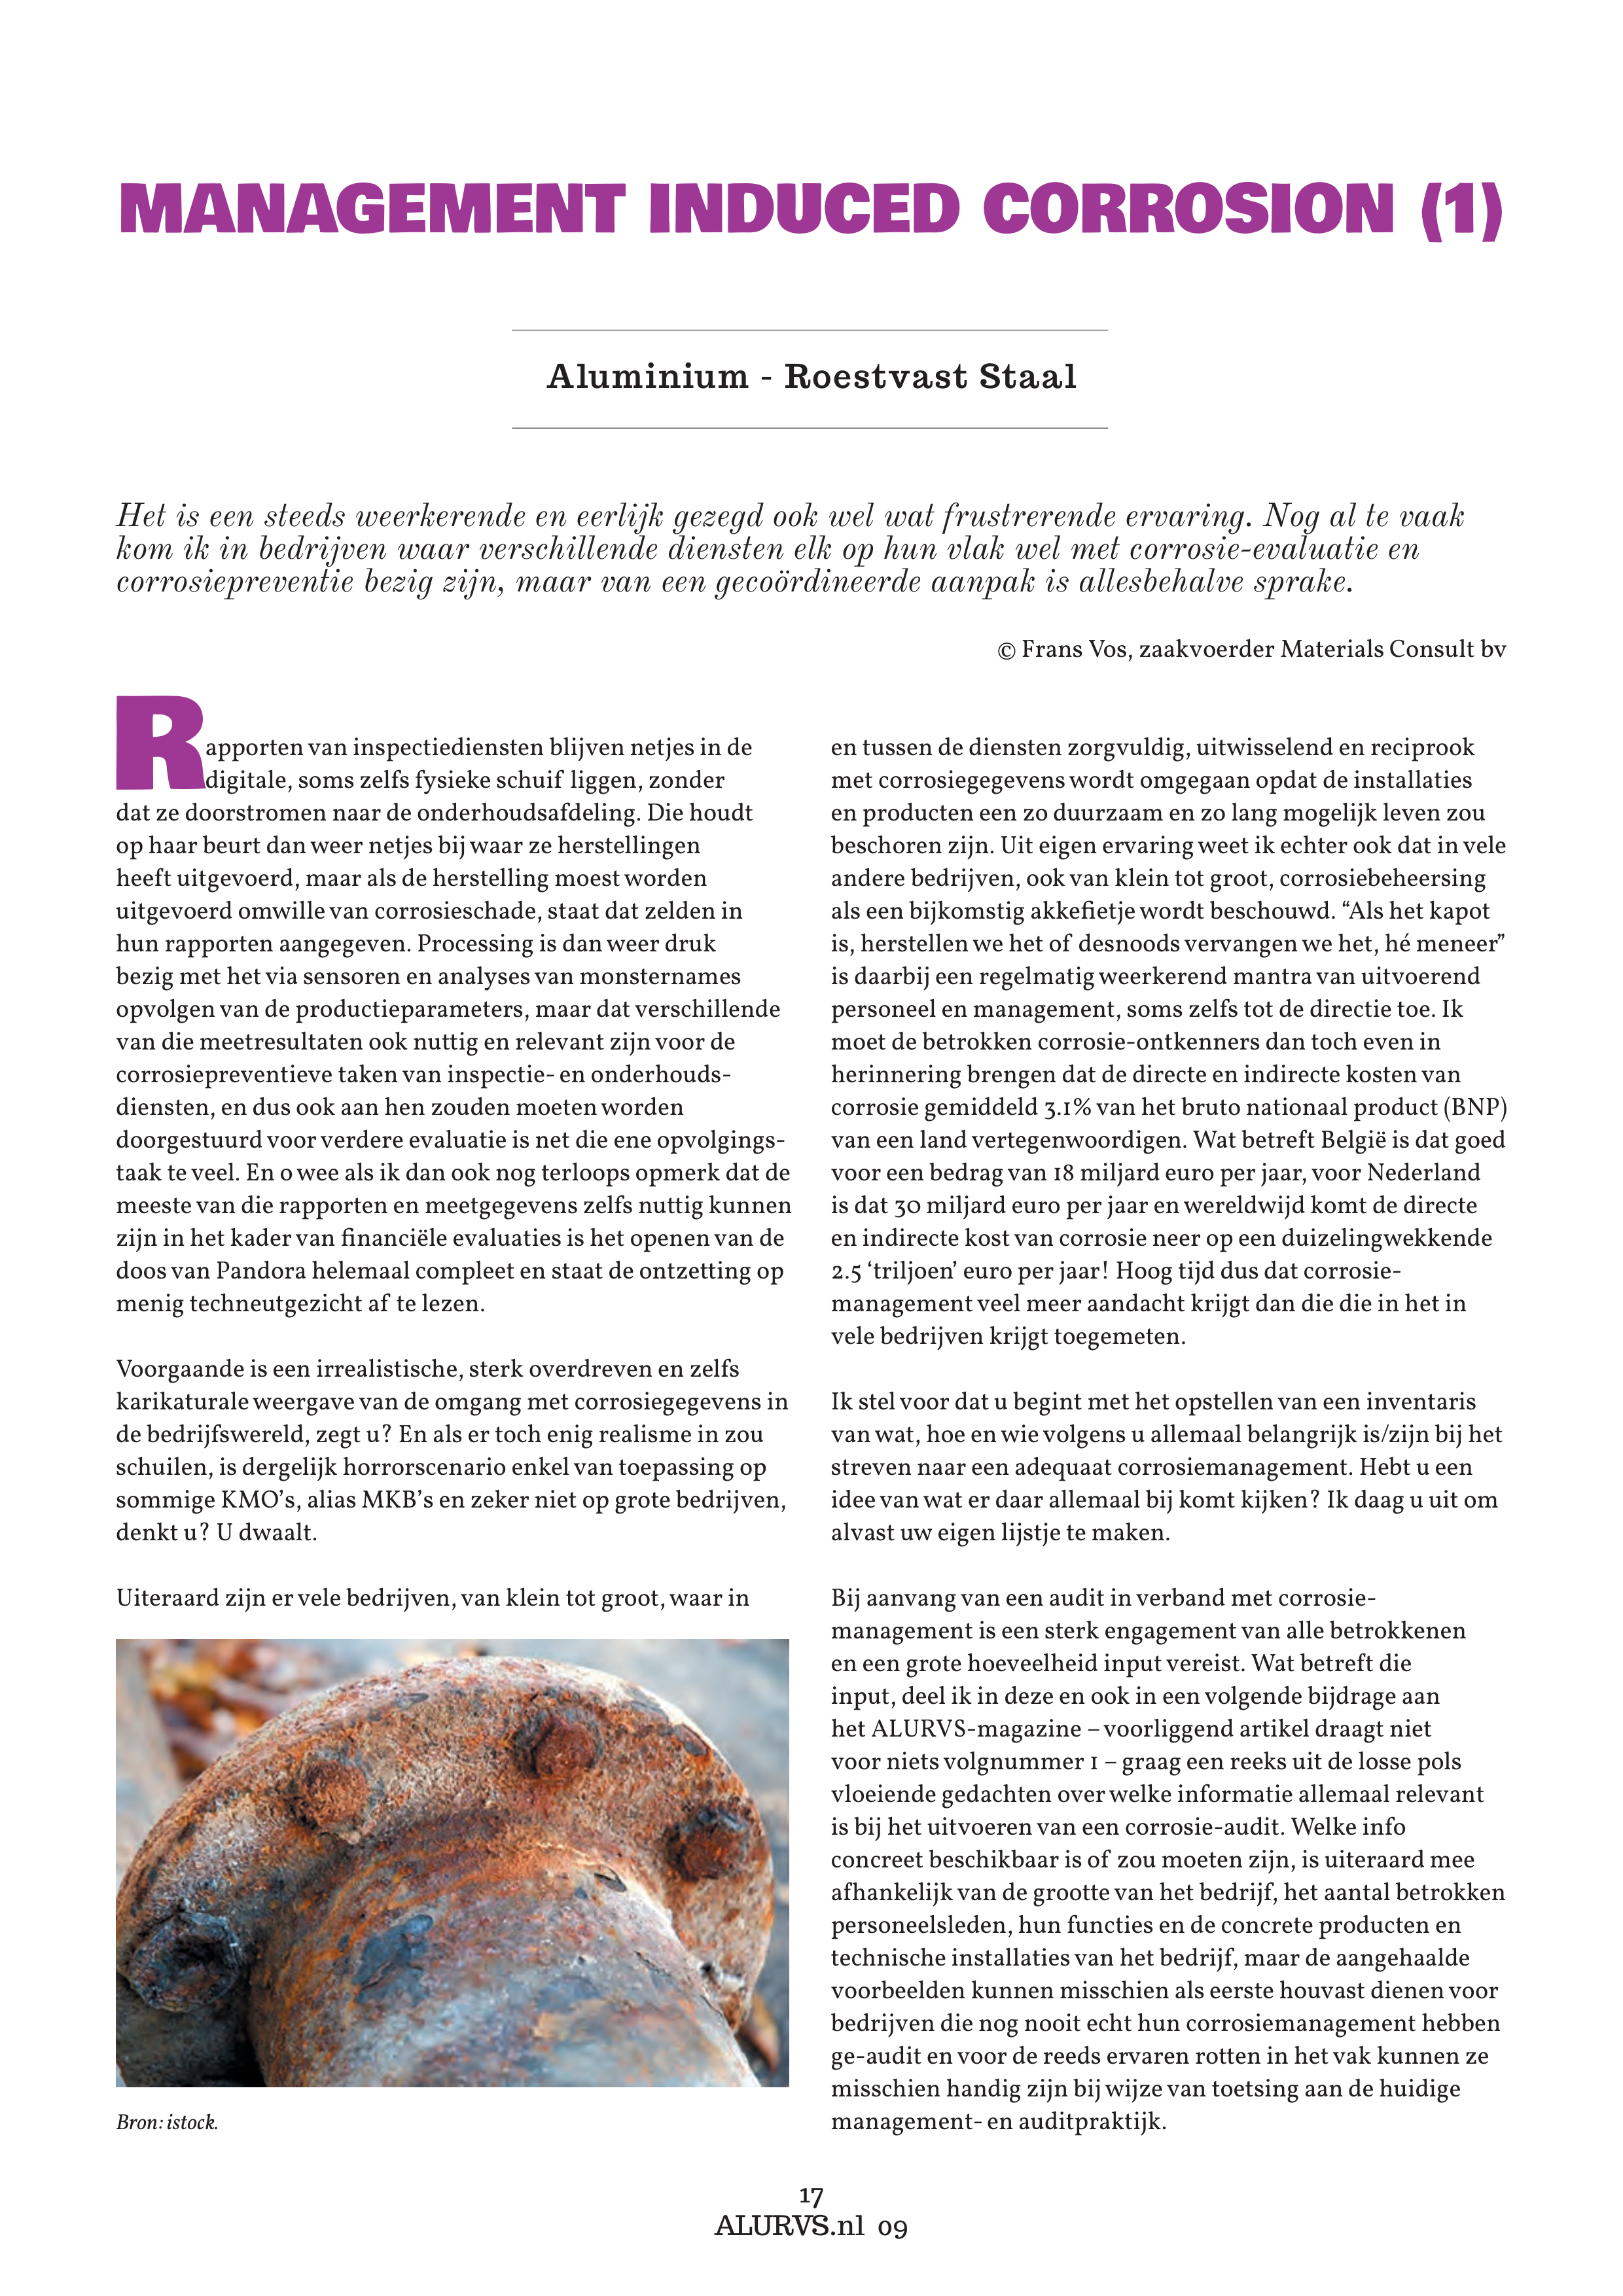 Management Induced Corrosion (1), ALURVS.nl, 9-2022